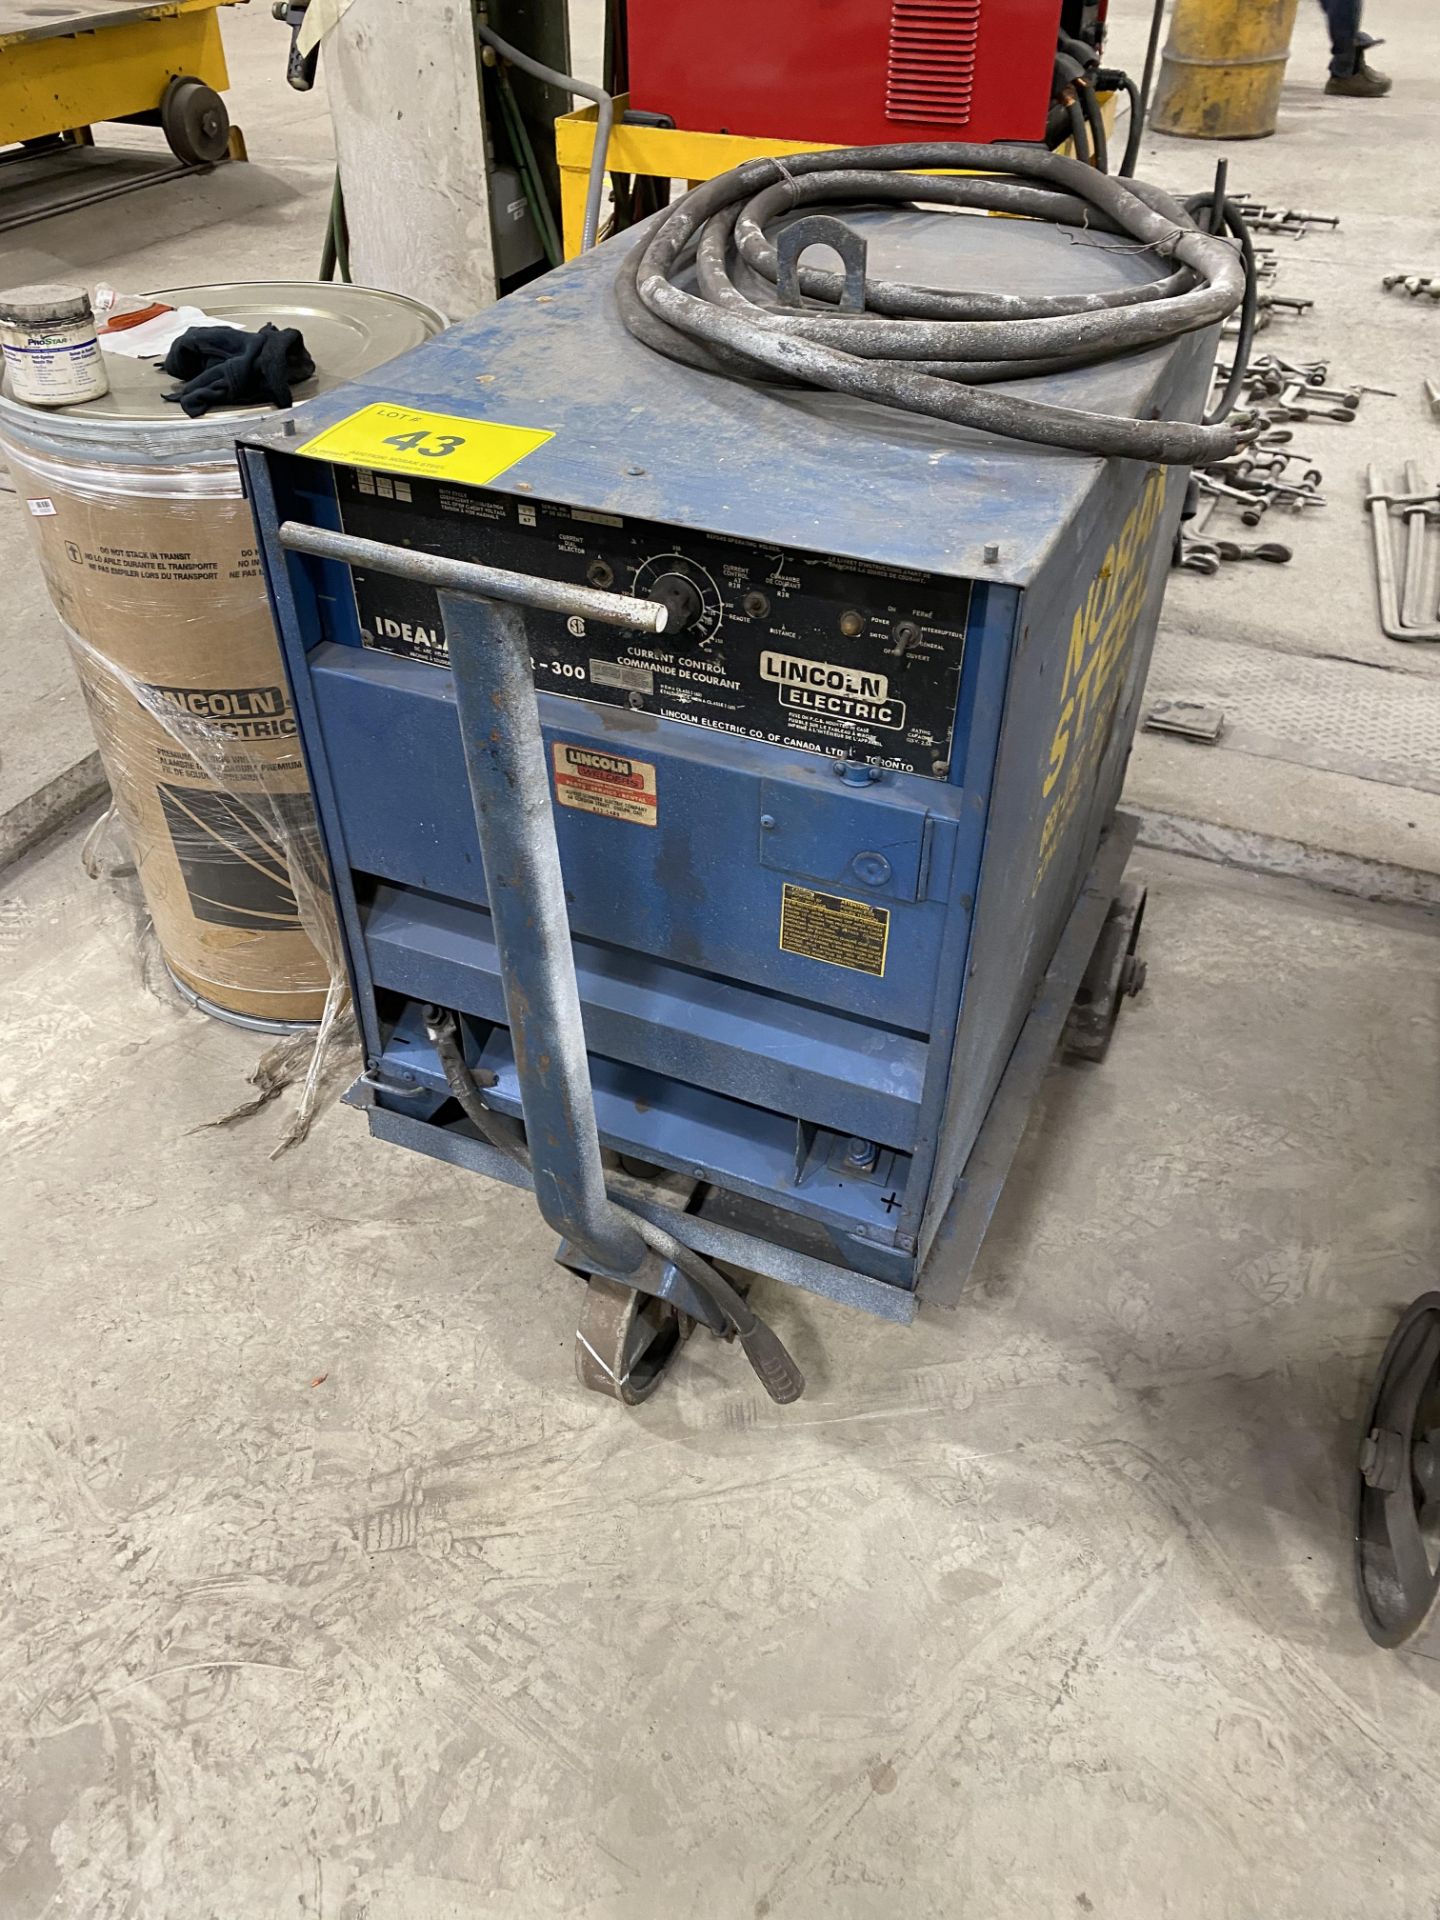 LINCOLN ELECTRIC R3R-300 DC ARC WELDER W/ CART - Image 4 of 4